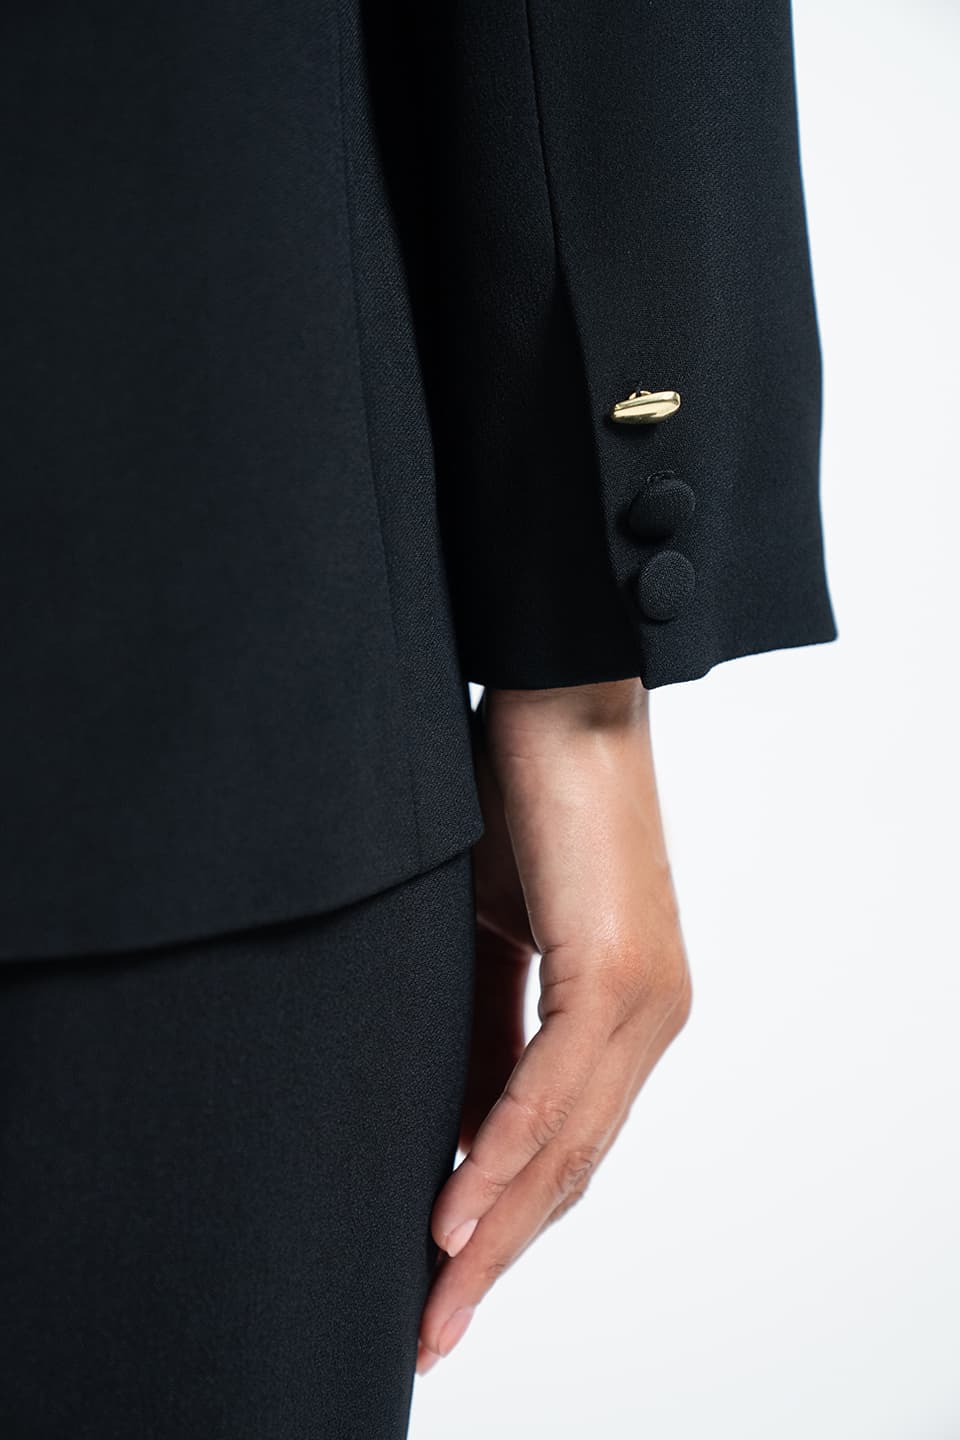 Thumbnail for Product gallery 6, Black Blazer